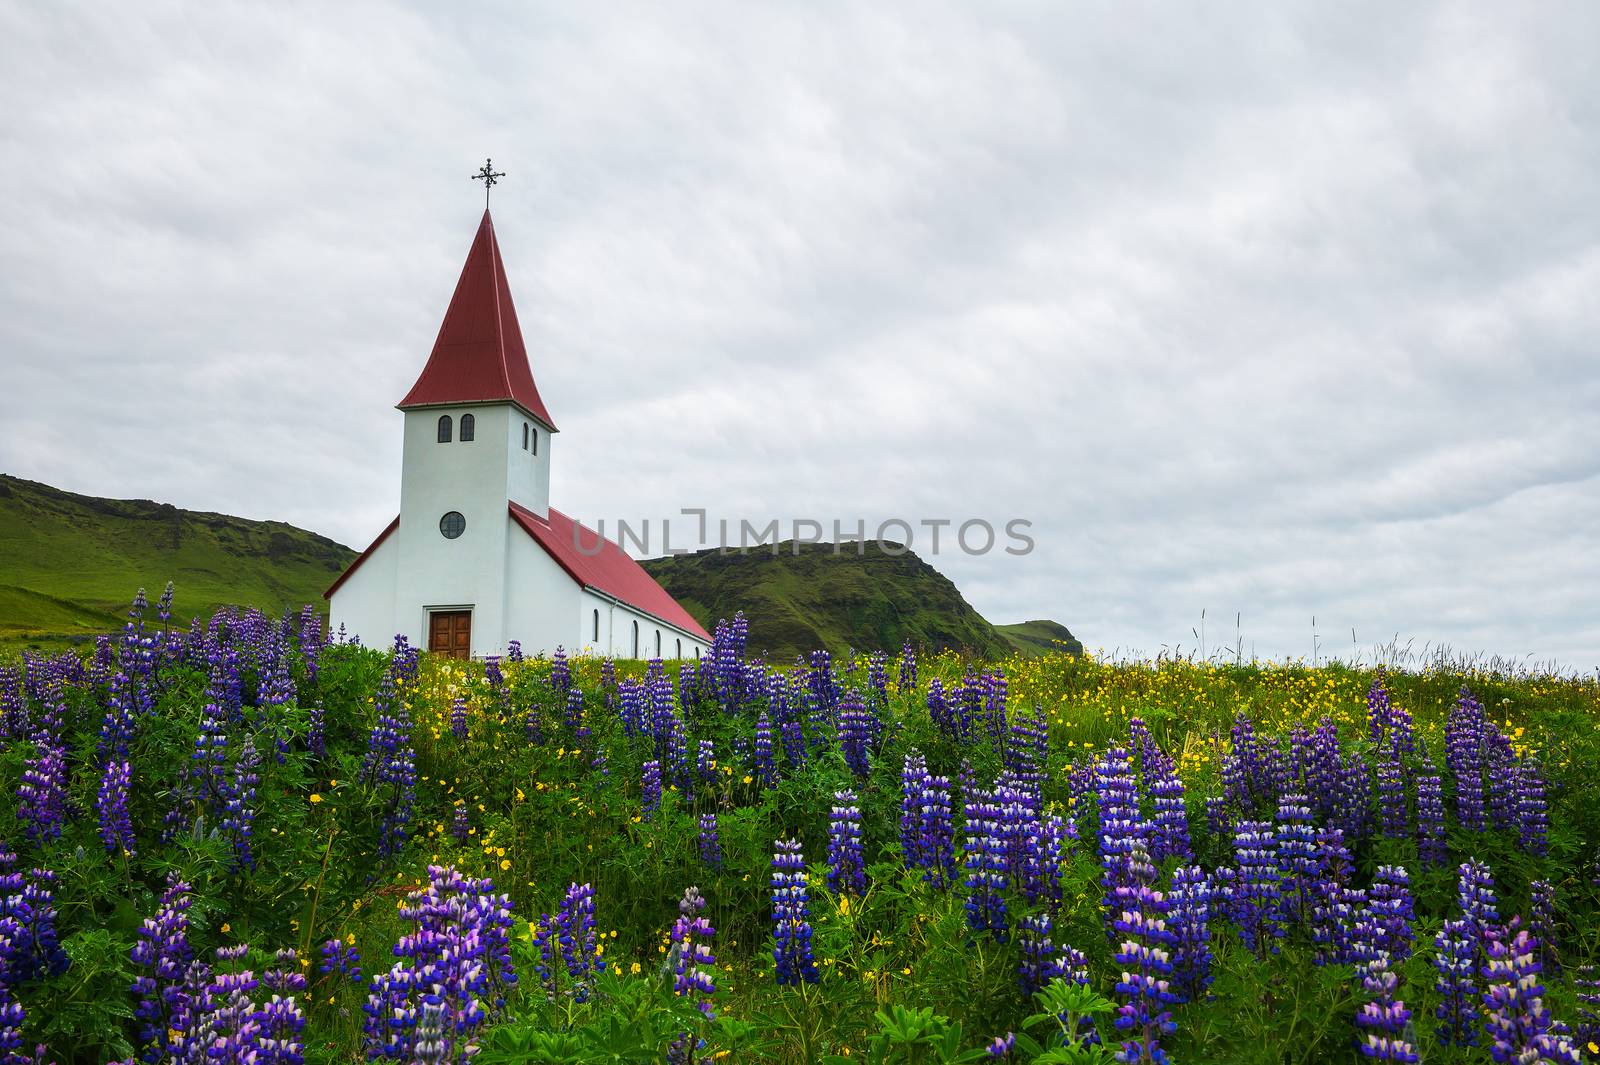 Church surrounded with blooming lupine flowers in Vik, Iceland by nickfox